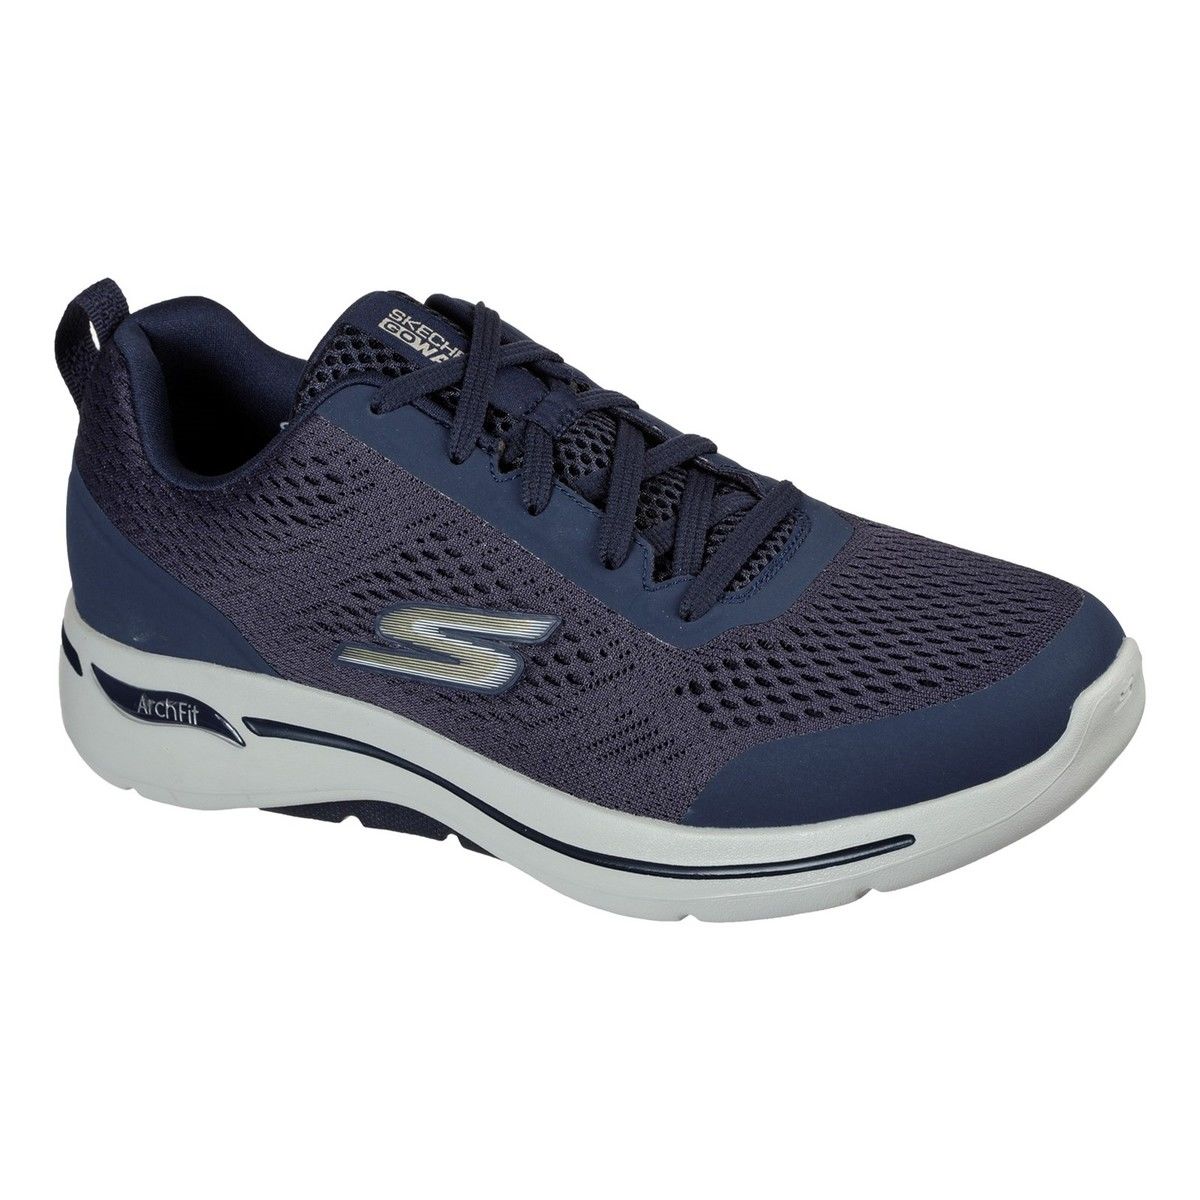 Skechers Go Walk Arch Fit Navy Gold Mens Trainers 216116 In Size 8 In Plain Navy Gold